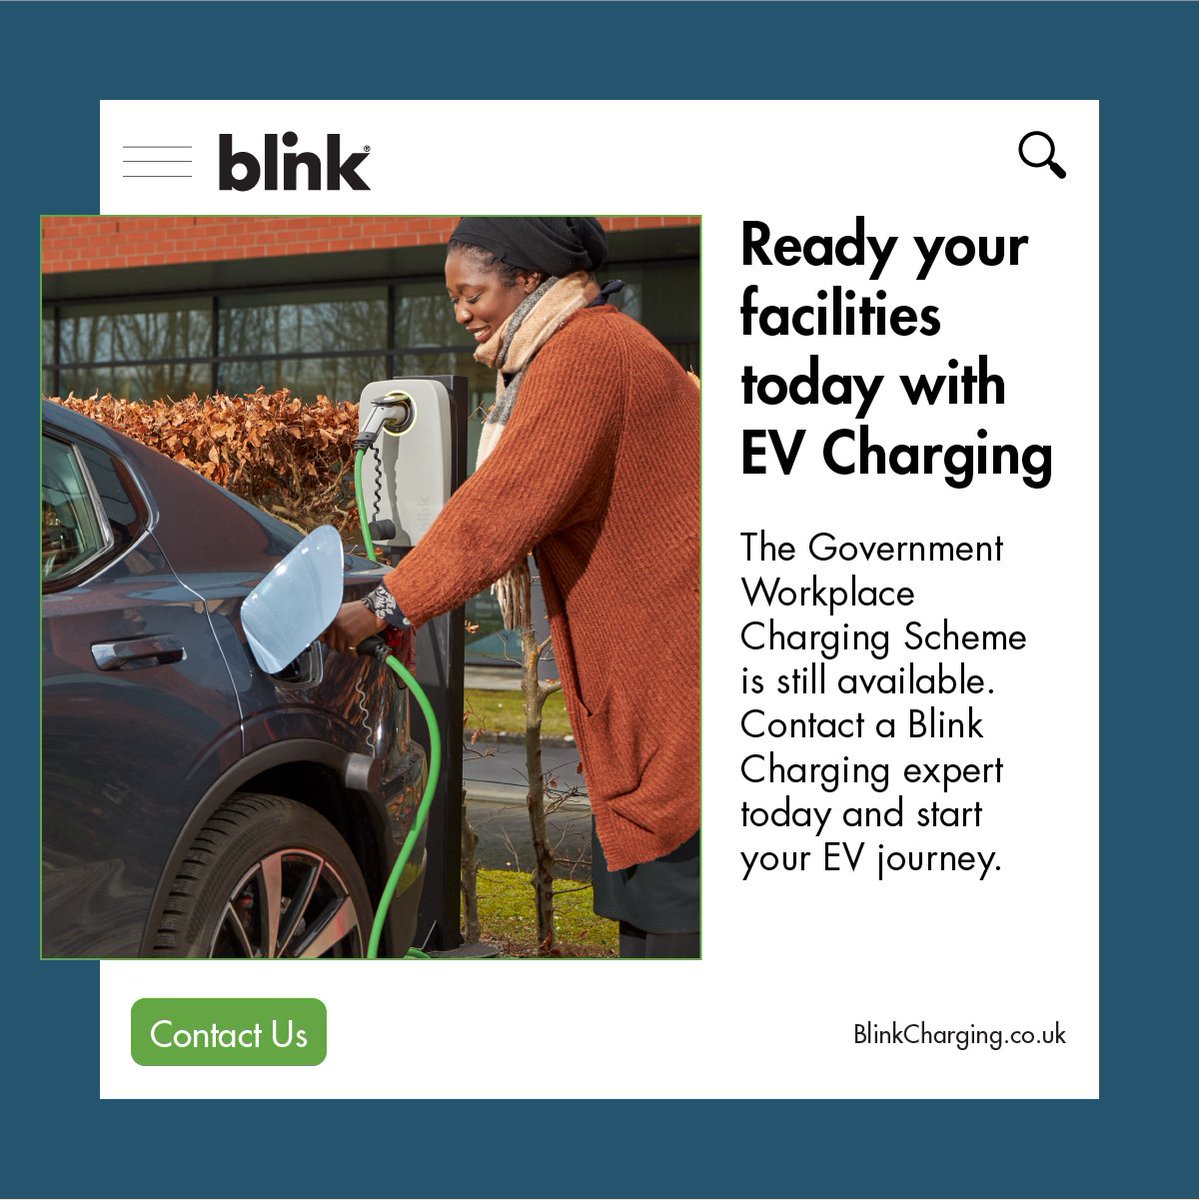 There is still time to access the Workplace Charging Scheme Grant. Contact one of the industry experts at blink Charging UK today and start your journey to #EVCharging in the workplace blinkcharging.co.uk/corporate/cont… ow.ly/vjWy50QvRTb